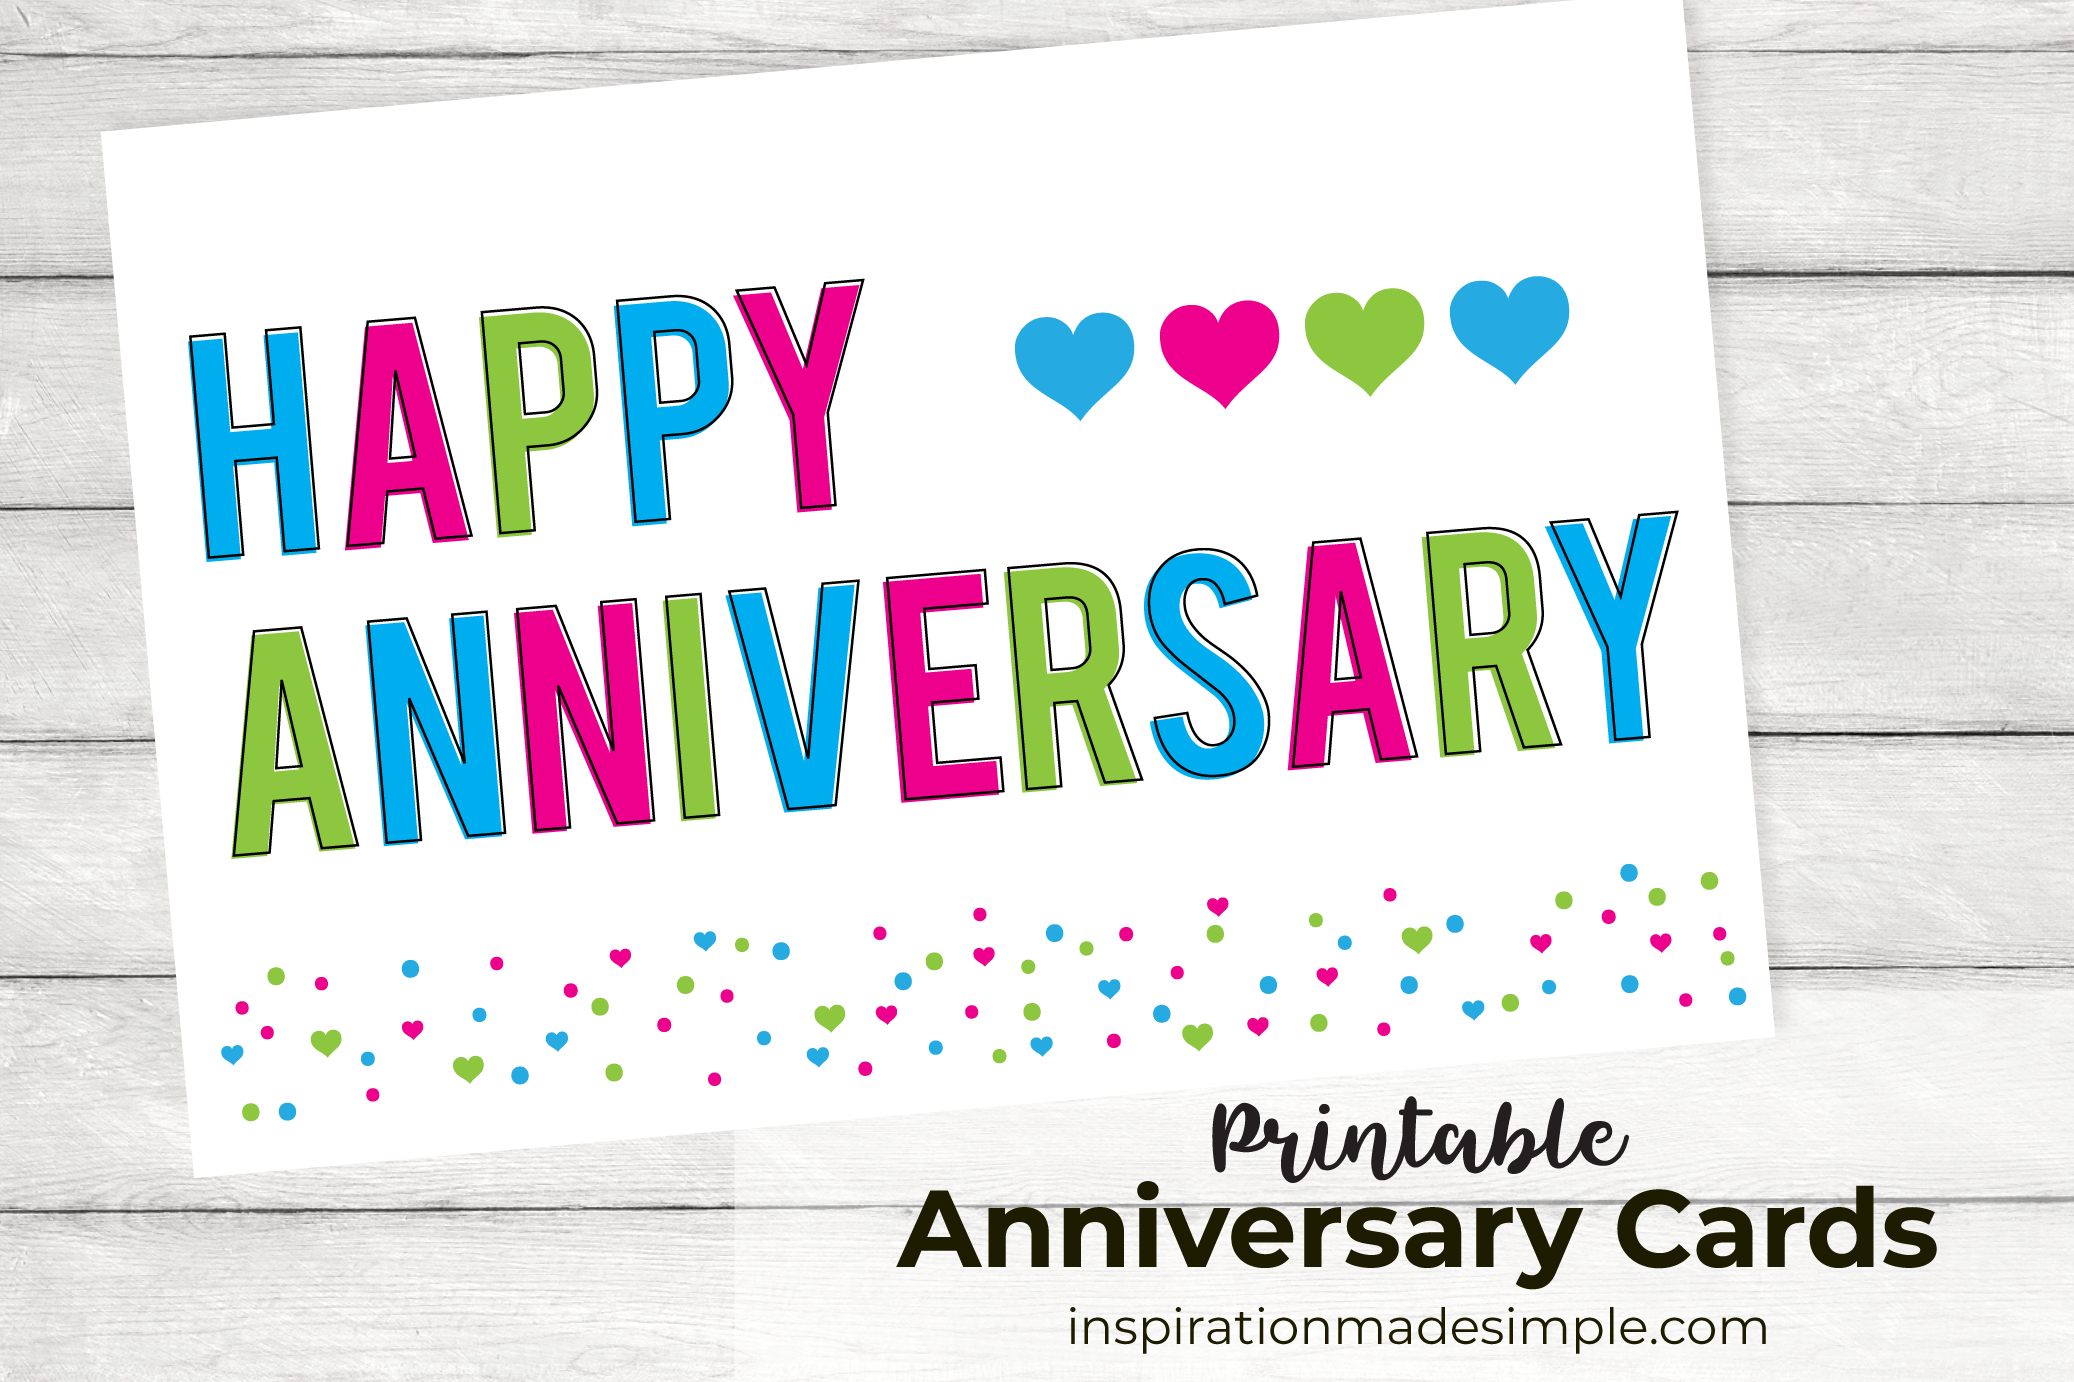 Anniversary Cards And Wedding Cards - Free Printables - Free Printable Anniversary Cards No Download